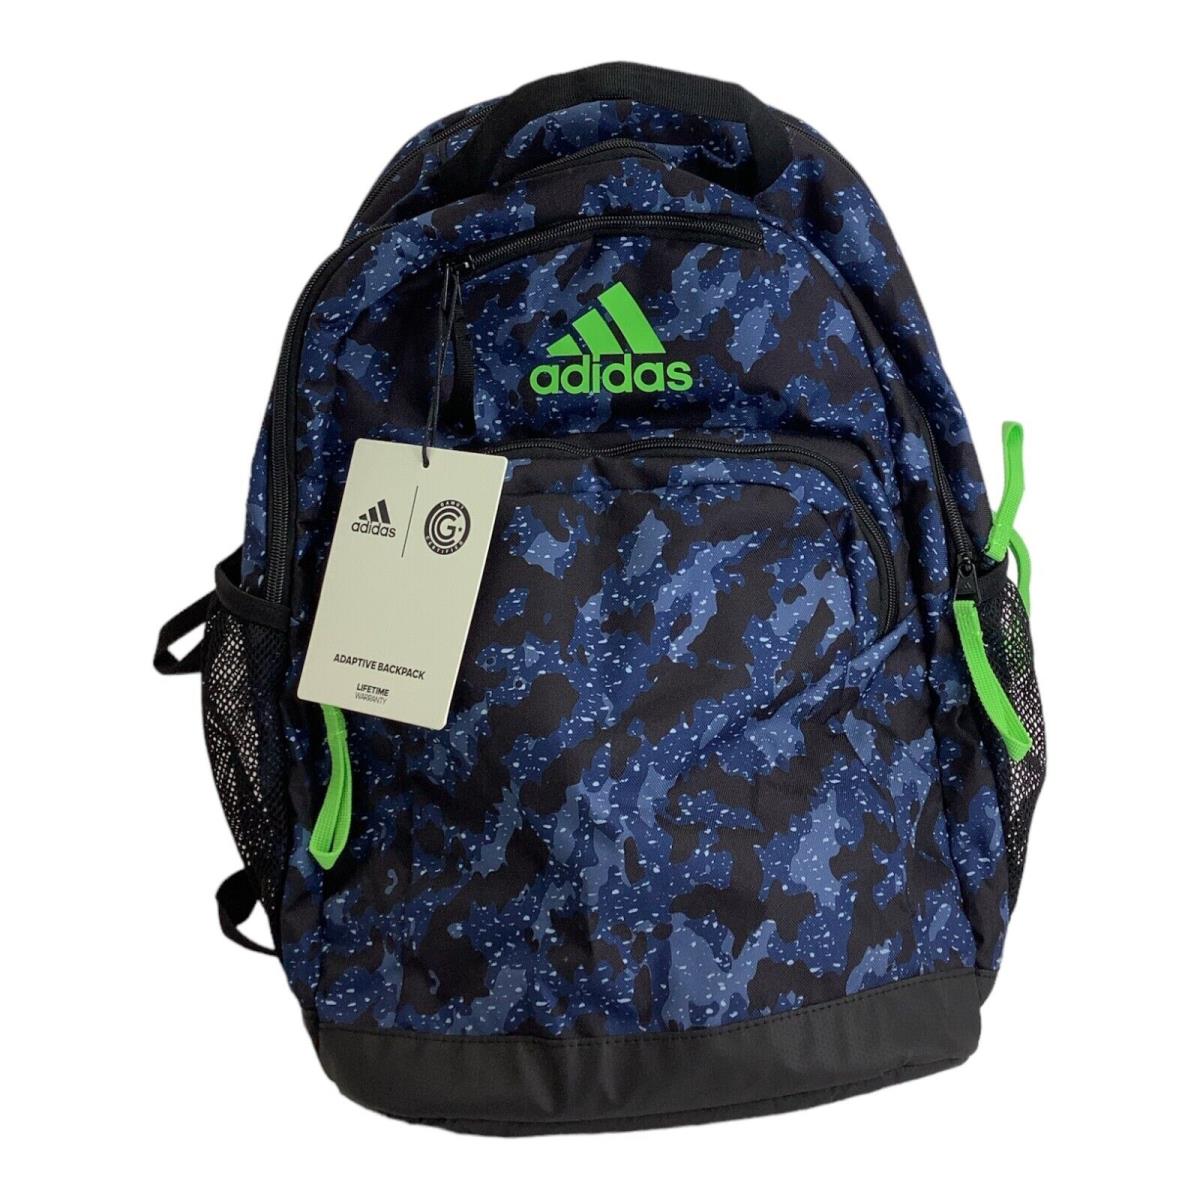 Adidas Adaptive Backpack Laptop Compartment Tablet Sleeve Galaxy Camo Blue